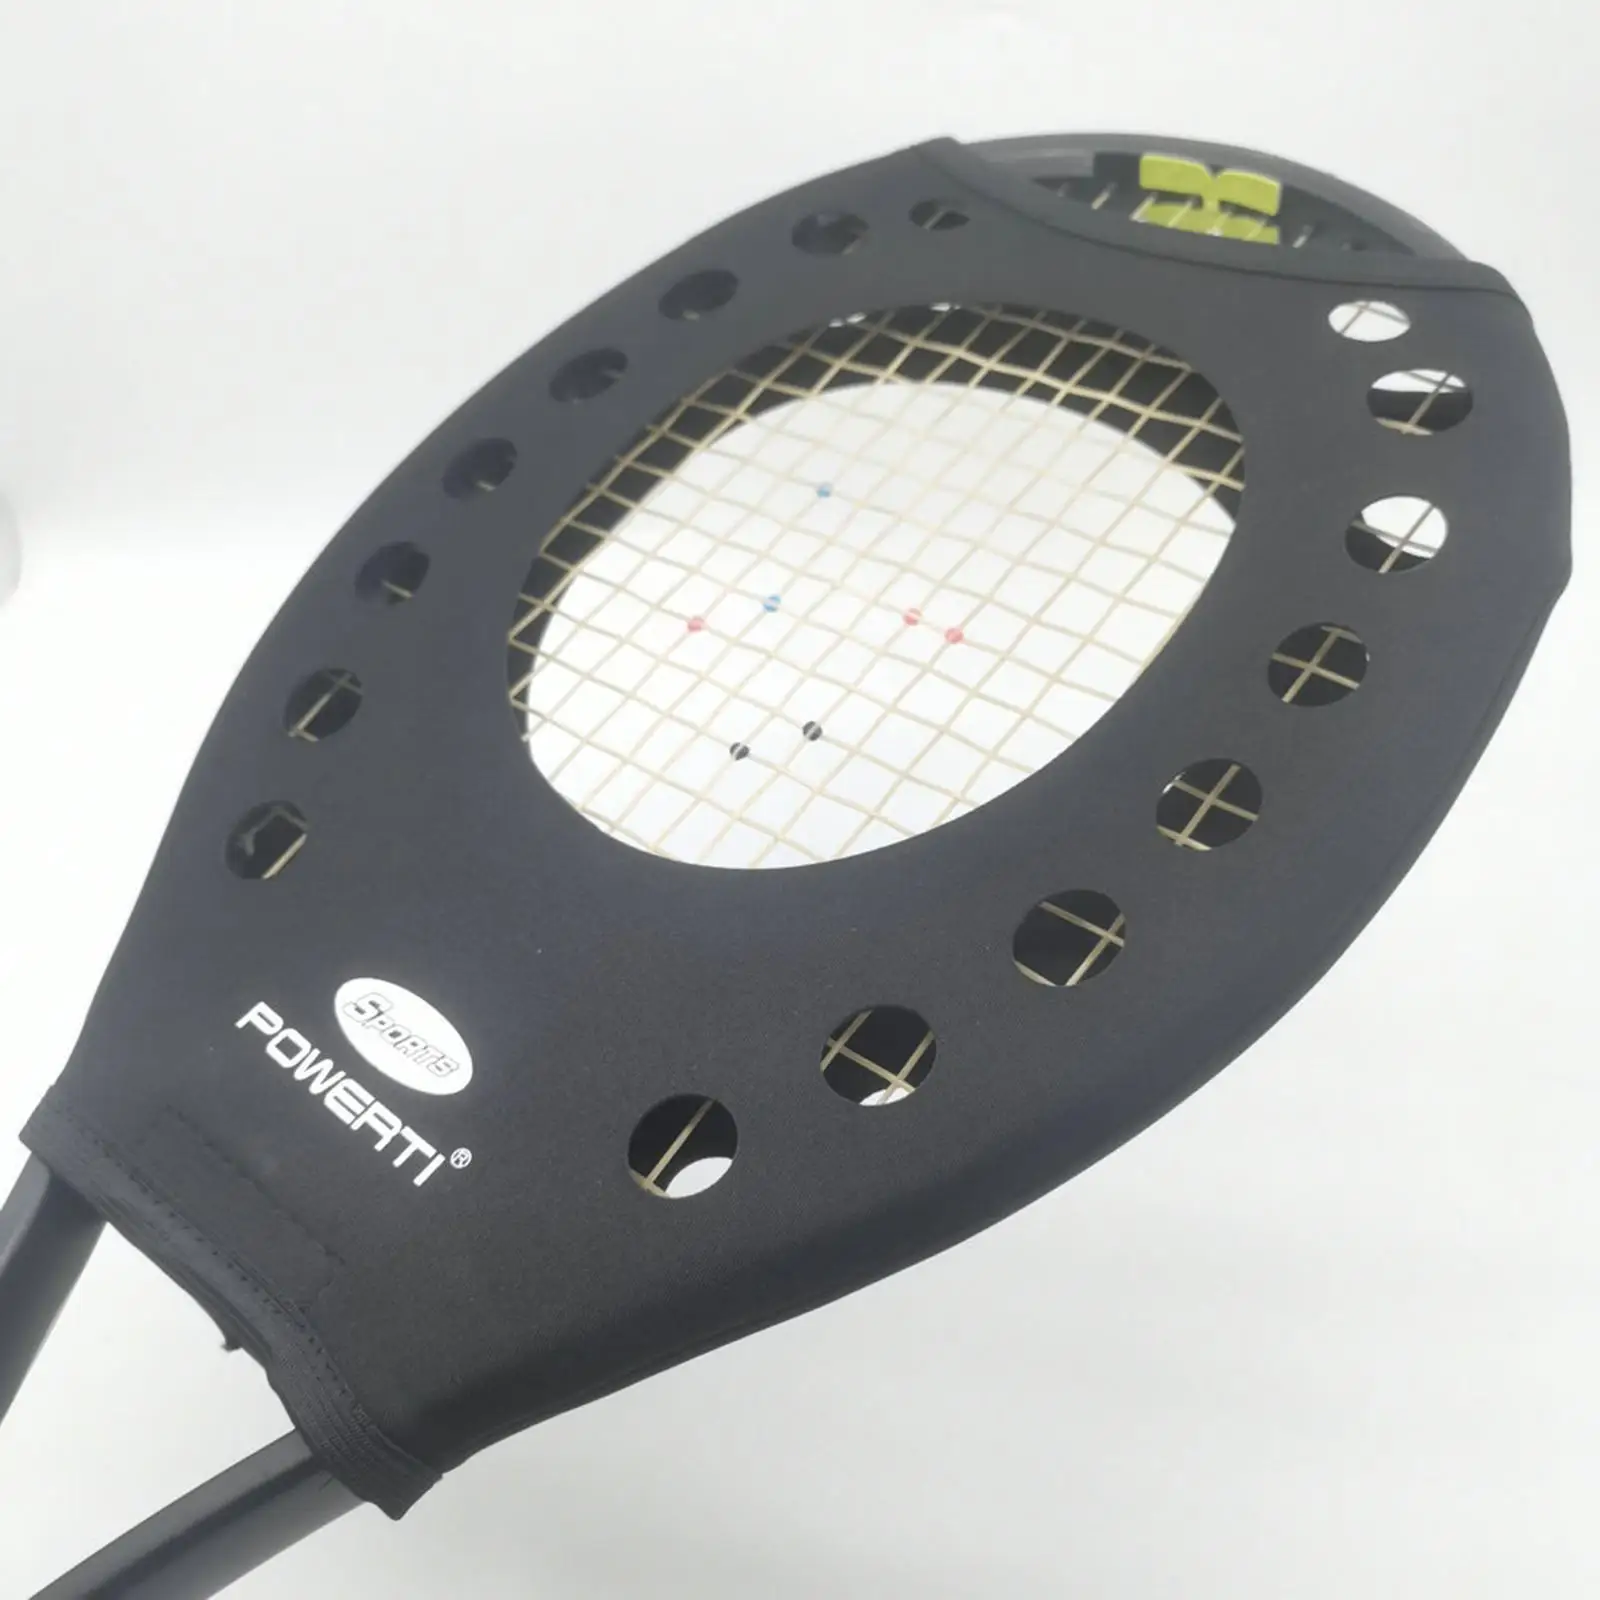 Tennis Racket Sweet Spot Trainer Swing Training Aid Learn to Hit The Center